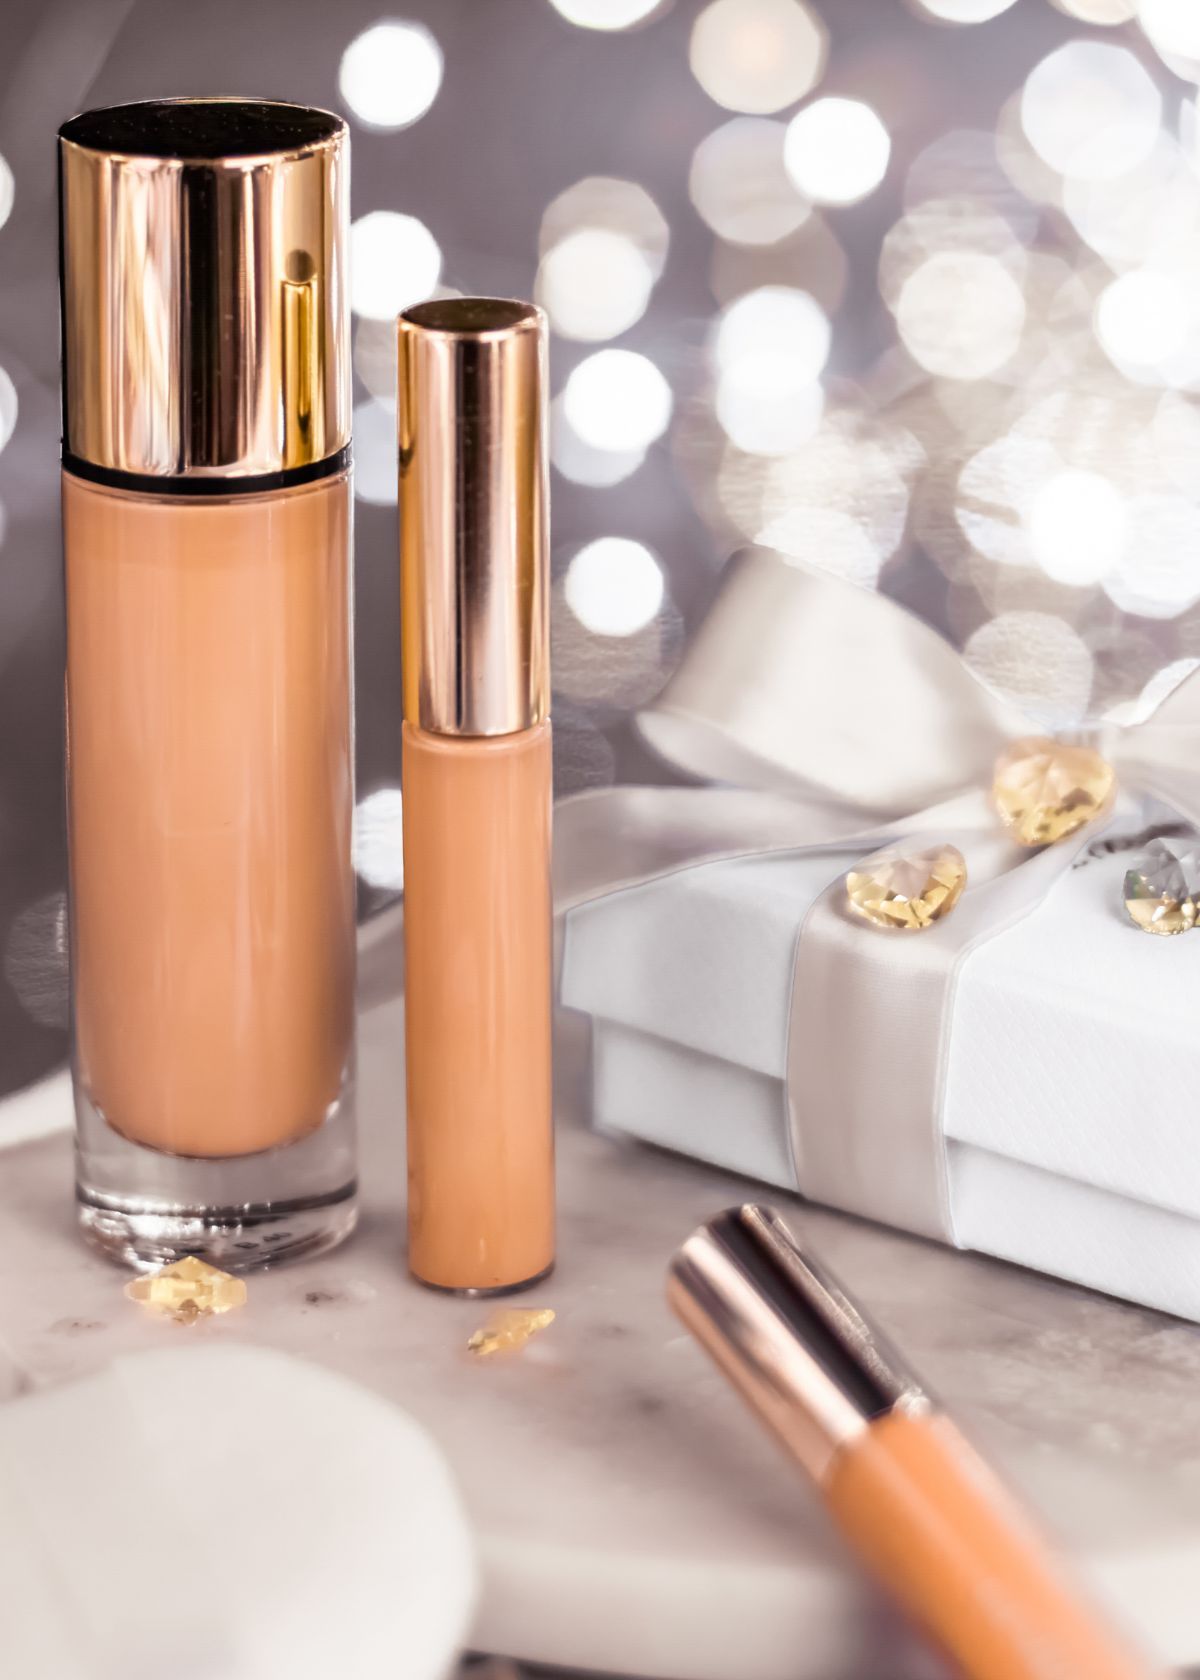 What's the Difference Between Foundation and Concealer?